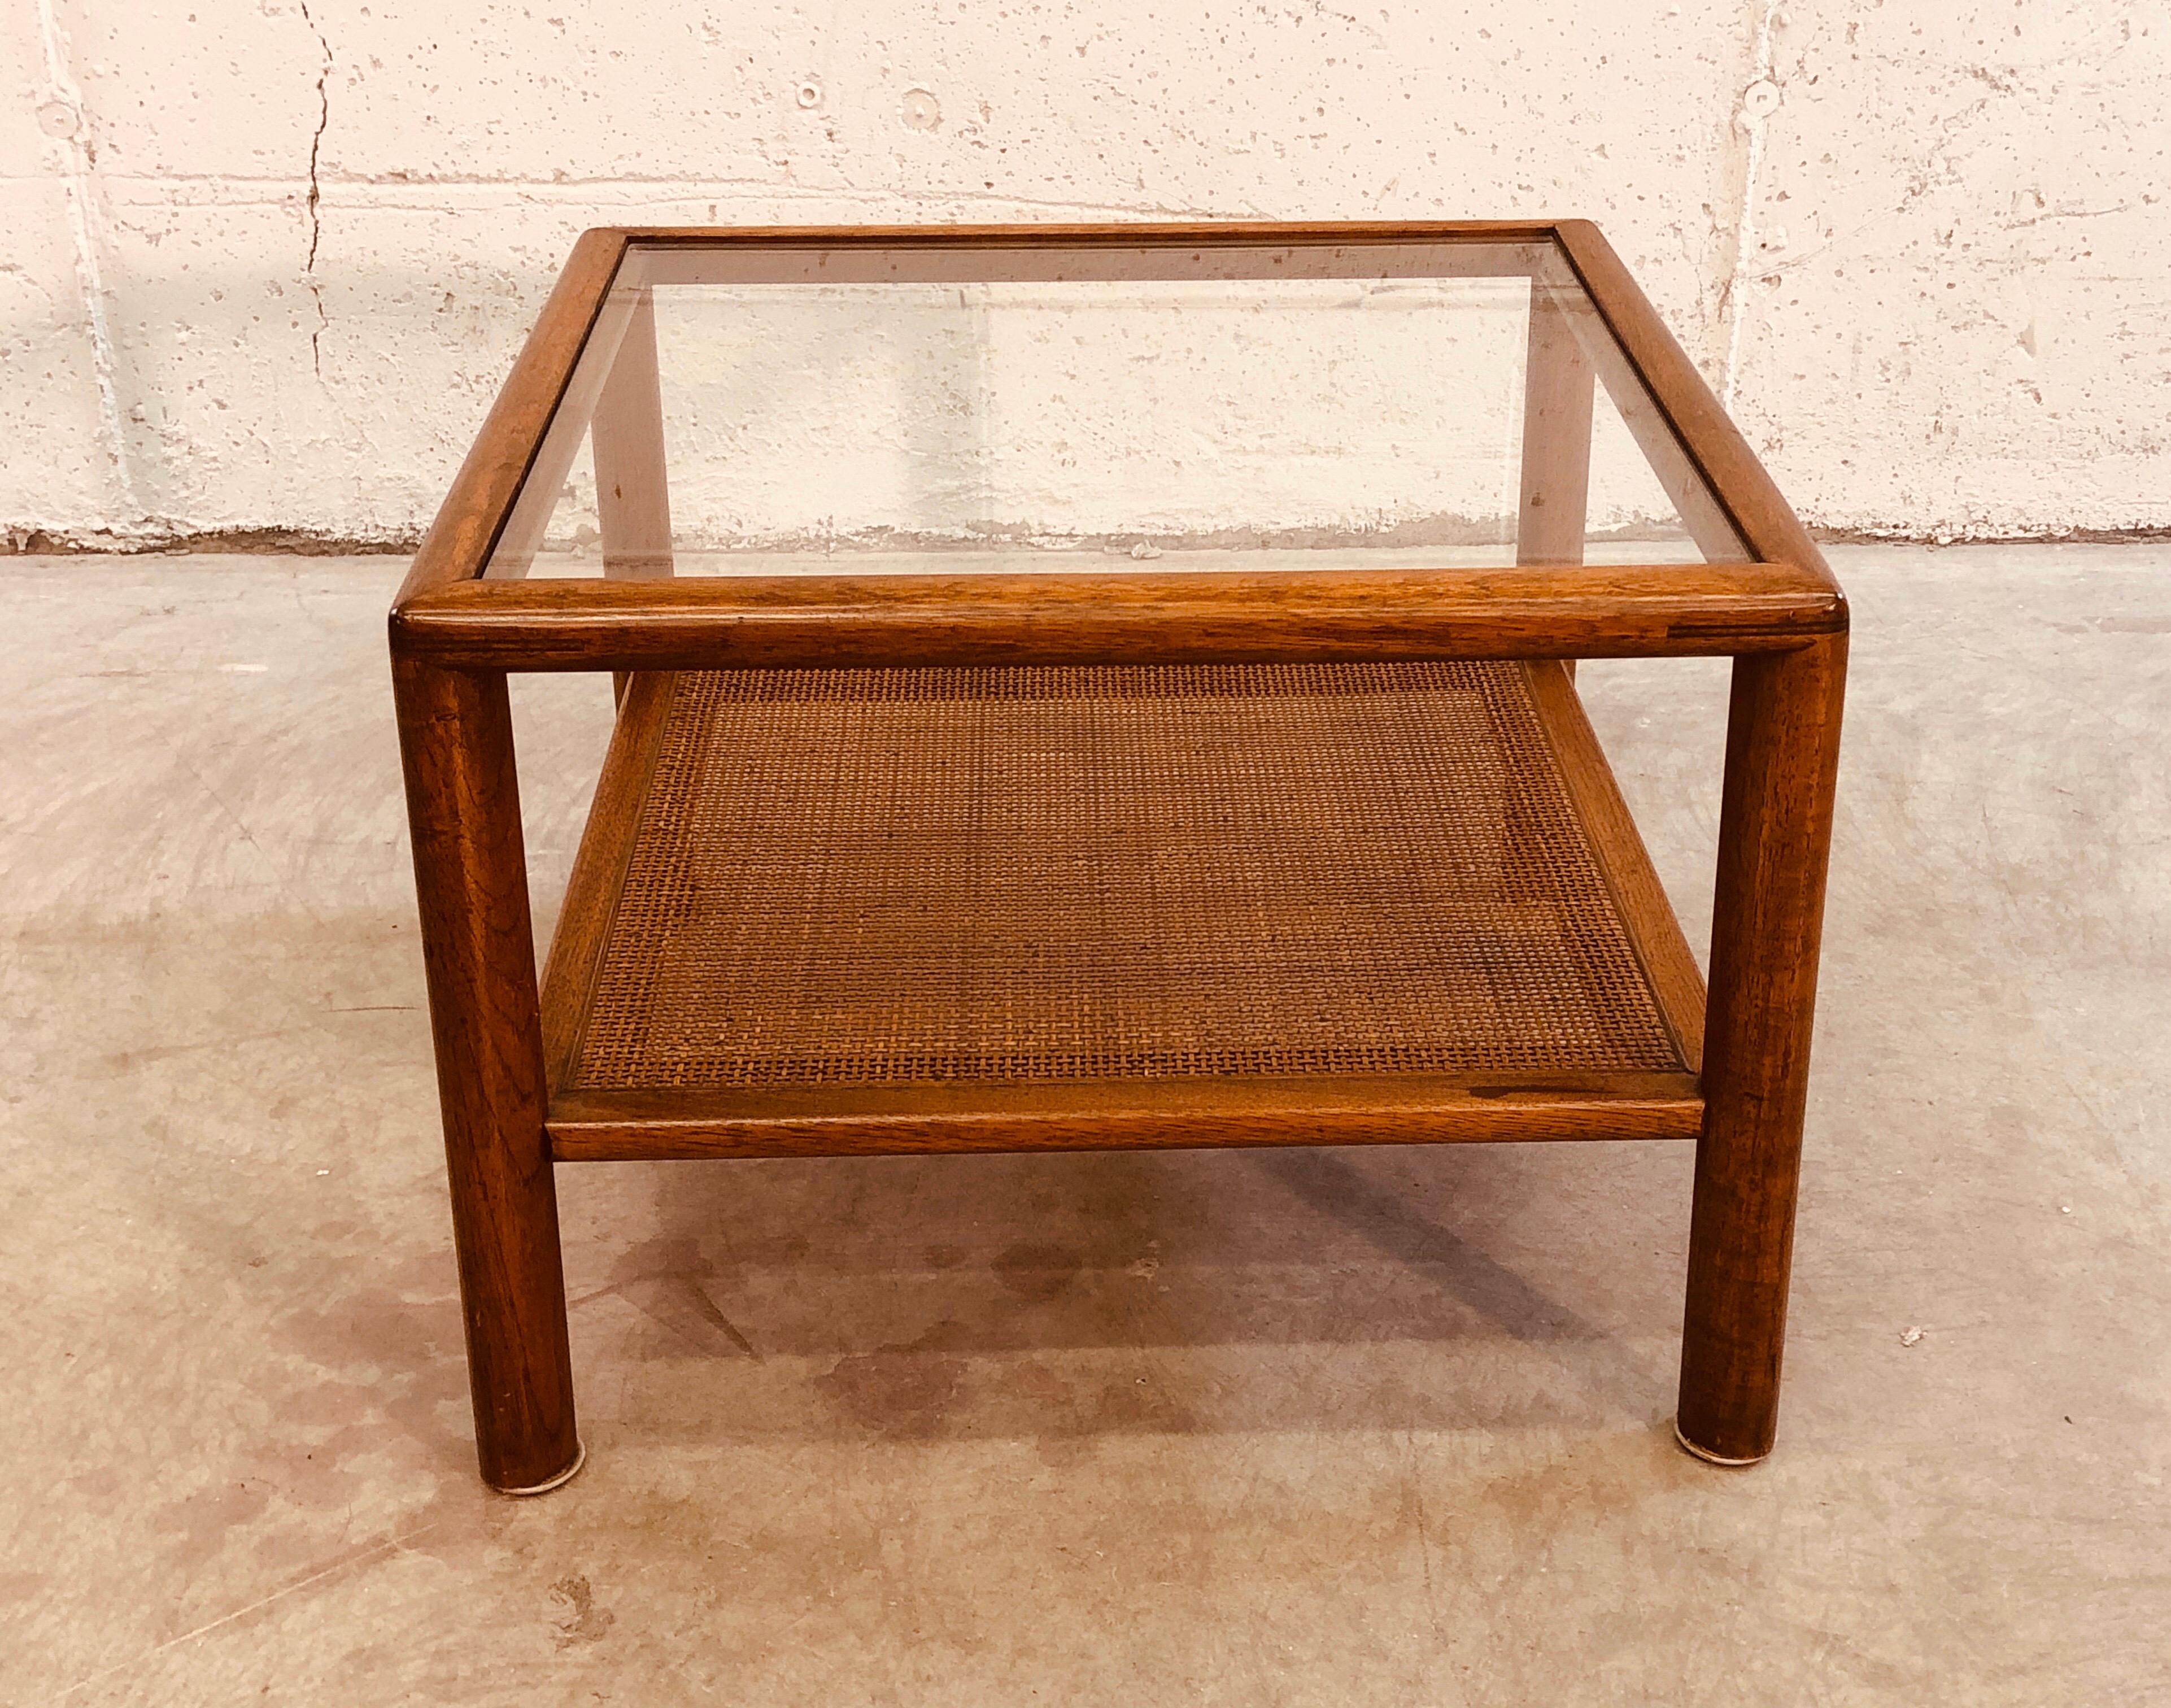 Vintage 1960s small square glass top side table with a caned shelf. The wood is mahogany and the cane is in excellent condition. No marks.